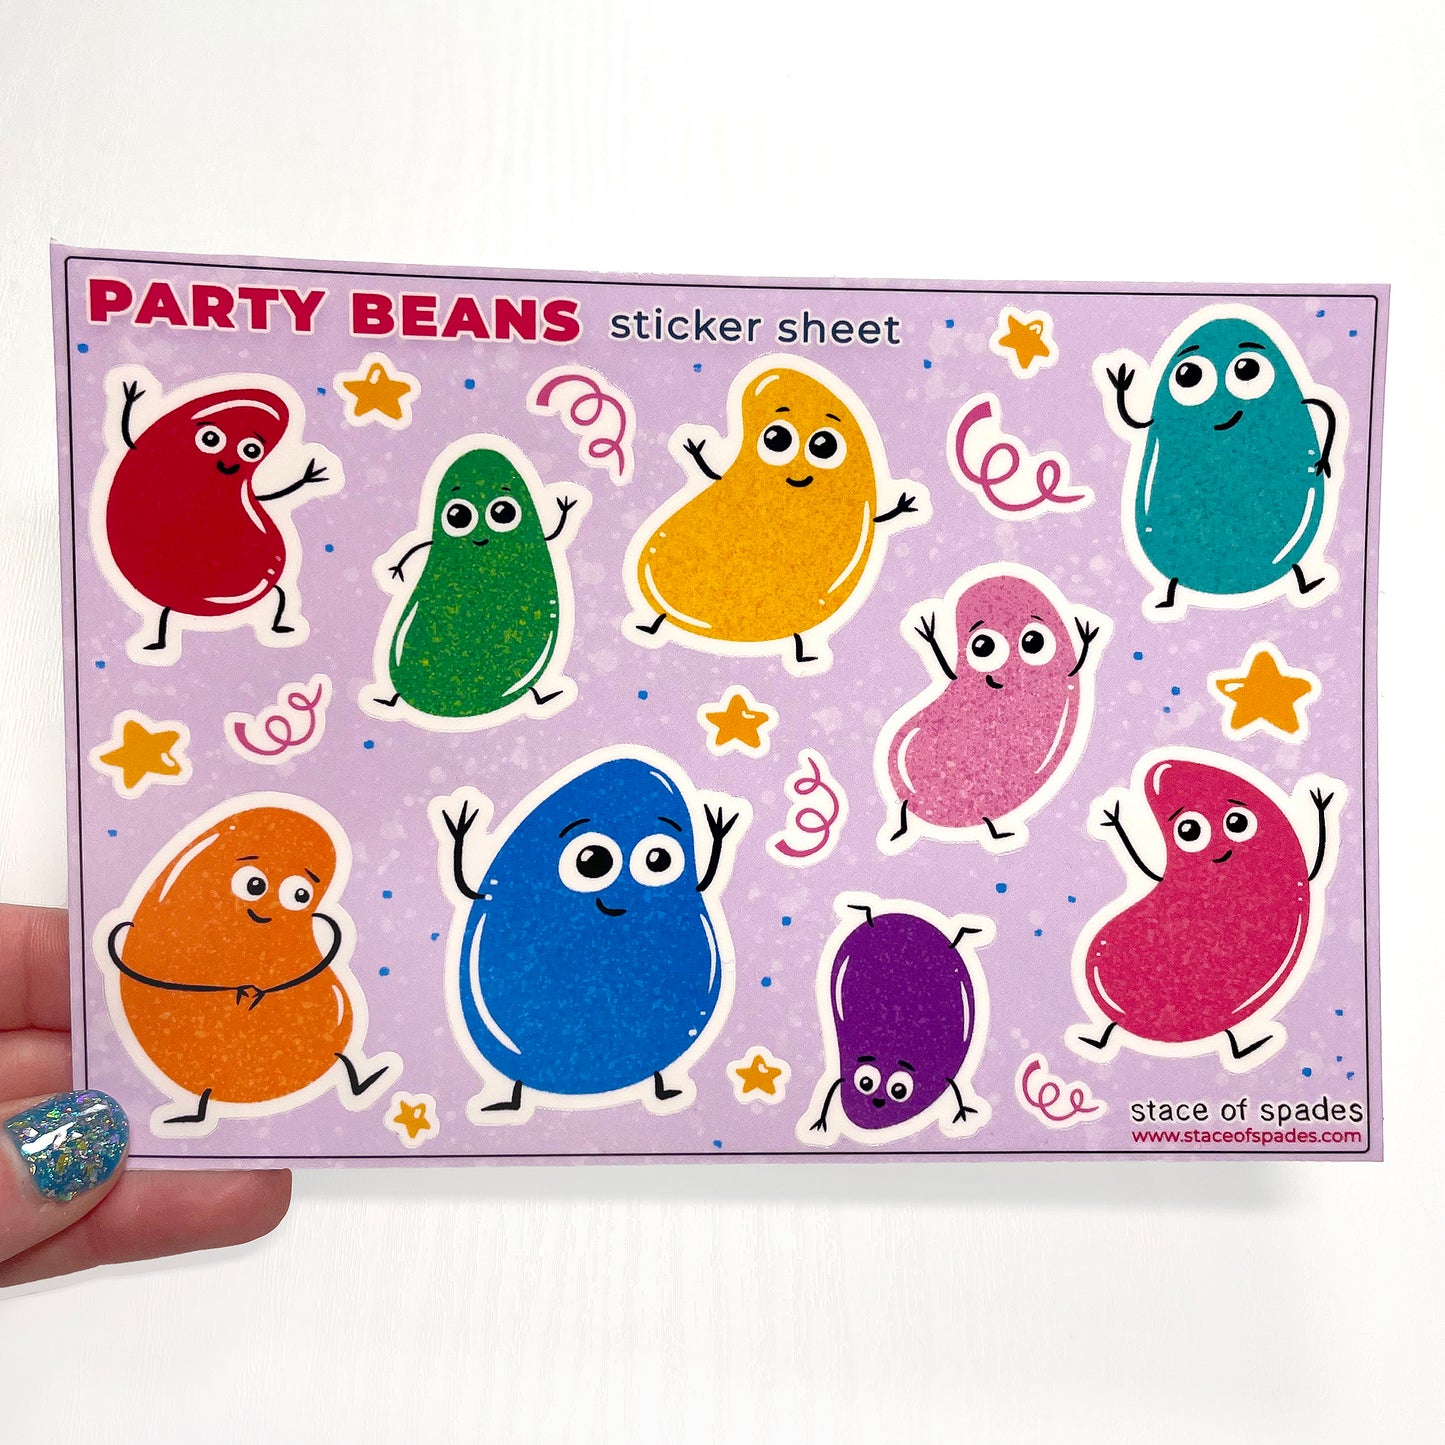 Party Beans!